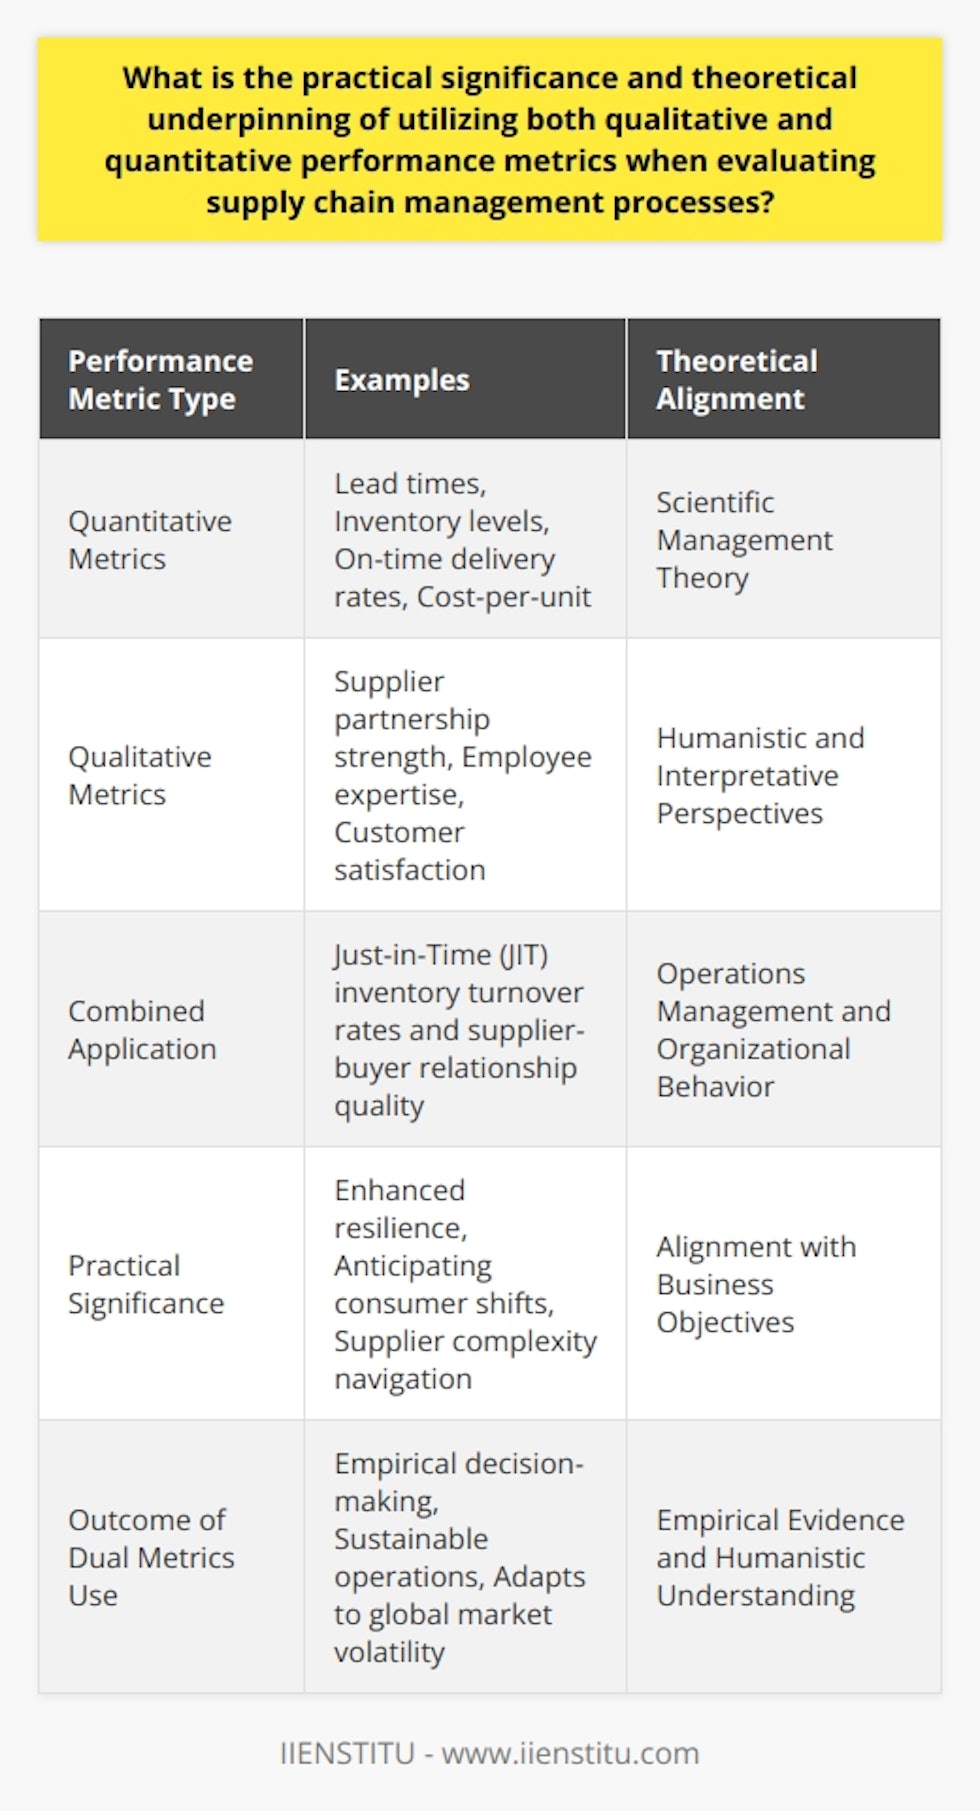 The integration of both qualitative and quantitative performance metrics in evaluating supply chain management processes is not only pragmatic but is fundamentally supported by diverse theoretical paradigms. By embracing this combined approach, organizations are able to delineate a more granular and insightful picture of their supply chain's performance, which is critical in the ever-evolving dynamics of global trade and logistics.Quantitative metrics, such as lead times, inventory levels, on-time delivery rates, and cost-per-unit, offer a tangible, data-driven perspective on the supply chain's operational efficiency. They are invaluable in setting and tracking objective performance targets, benchmarking against industry standards, and identifying areas for improvement through statistical analysis. On the other hand, qualitative metrics, like supplier partnership strength, employee expertise, and customer satisfaction, although more subjective, provide a rich context to the quantitative data, giving stakeholders insight into the less tangible aspects affecting supply chain performance.The theoretical underpinning for this dual approach aligns with several academic fields, notably operations management and organizational behavior. On one hand, it taps into the scientific management theory, which promotes the use of quantifiable data to optimize workflows and systems. On the other, it acknowledges the humanistic and interpretative perspectives that study the behaviors and interactions among the various stakeholders in the supply chain, recognizing that human judgment and experience often drive the operational success of processes that cannot be fully captured through numbers alone.For instance, a just-in-time (JIT) inventory system can be quantitatively assessed by looking at inventory turnover rates, but its qualitative success depends on the smooth communication and trust between suppliers and buyers — an aspect measured through qualitative metrics. The practical significance of utilizing both is evident in such scenarios where the two metrics intersect to overcome the limitations of either approach in isolation.In practice, decision-makers who recognize the importance of both metrics set the stage for a more resilient and responsive supply chain. They are able to anticipate shifts in consumer demands, navigate supplier complexities, and ensure a continual alignment between the supply chain strategy and the overall business objectives.To summarize, the use of qualitative and quantitative metrics is critically important in providing a holistic evaluation of supply chain processes. This duality grounds decision-making in both empirical evidence and humanistic understanding, culminating in sustainable supply chain operations that can withstand and adapt to the unpredictable nature of global markets.